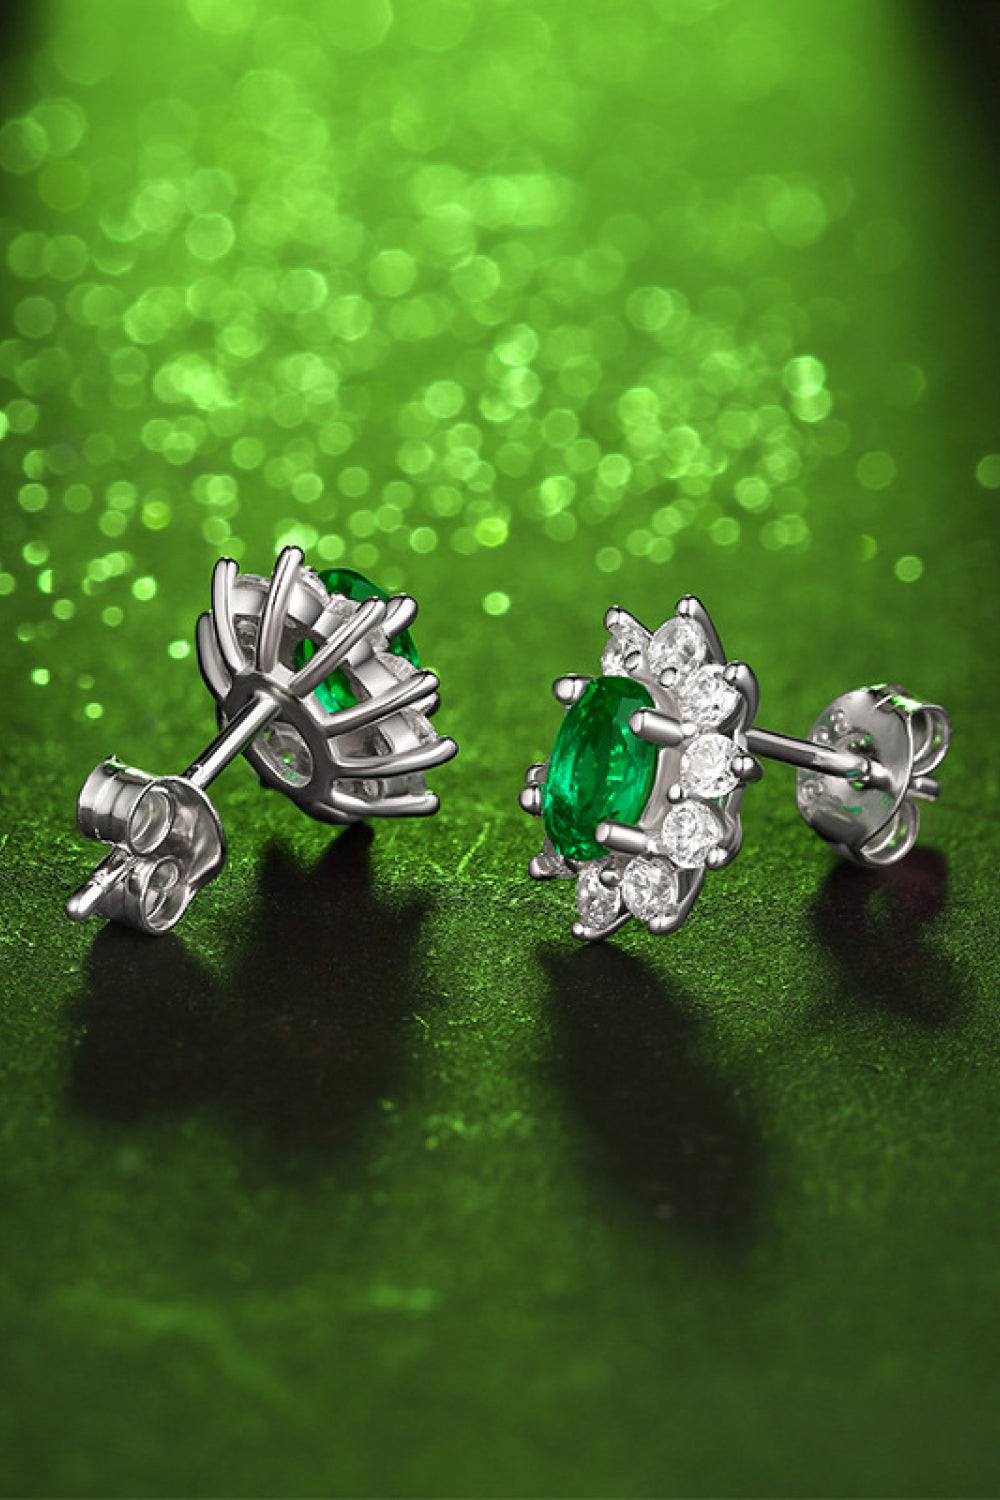 1 Ct Emerald and CZ Stud Earrings